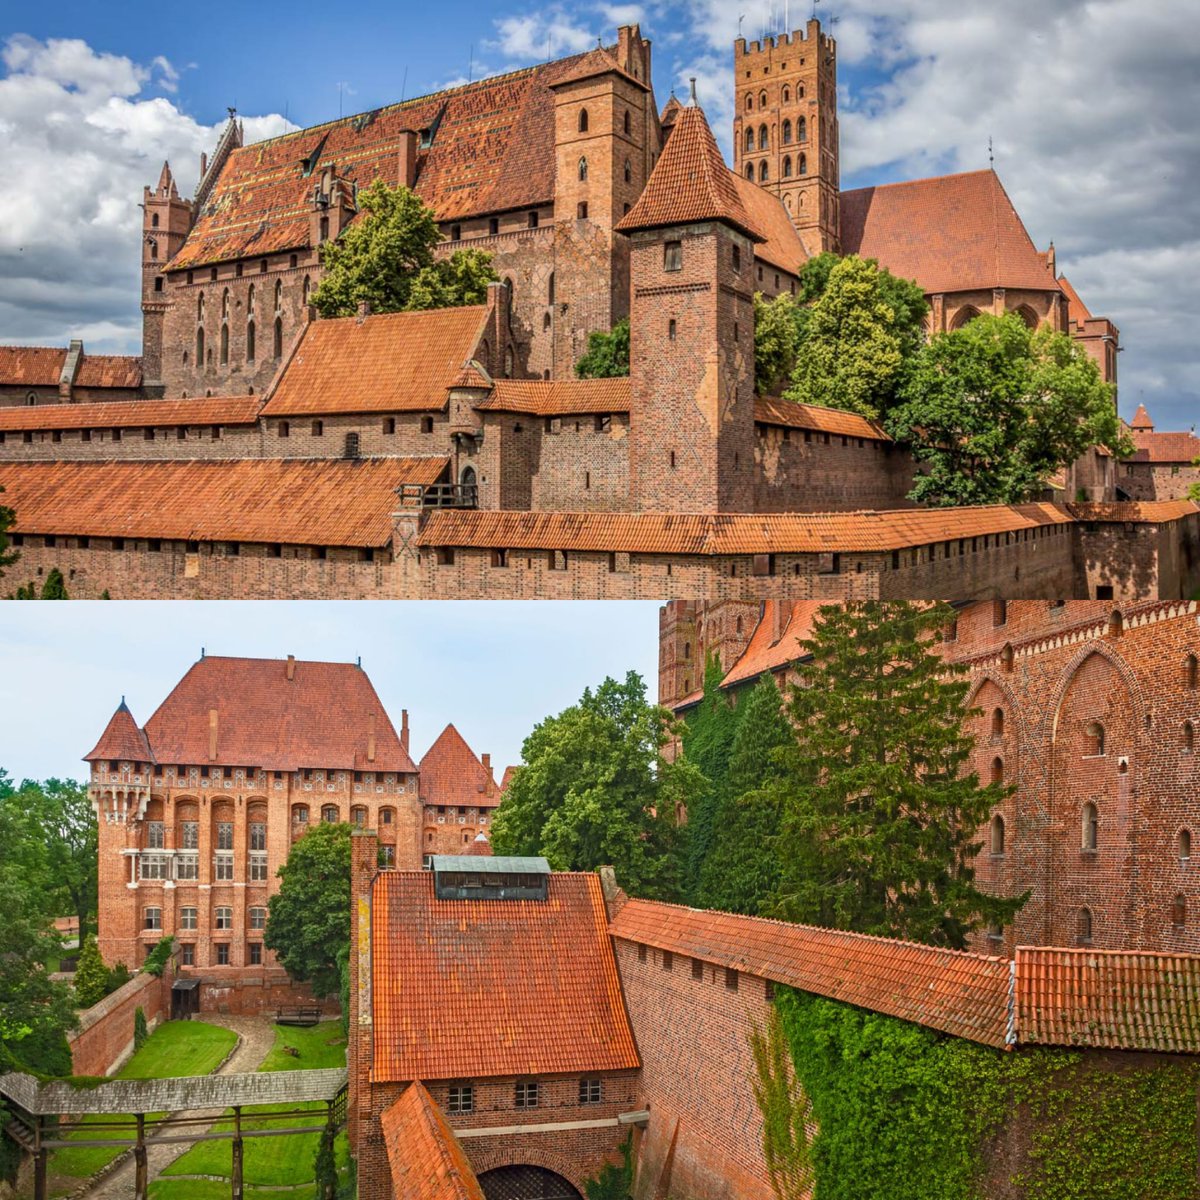 The Malbork castle #Poland is the mightiest fortress of medieval Europe. Its construction begun in the 13th century. But major transformation begun in early 14th century, when the Grand Master Siegfried von Feuchtwangen moved his office to Malbork. #architecture @EwaWisniewska78